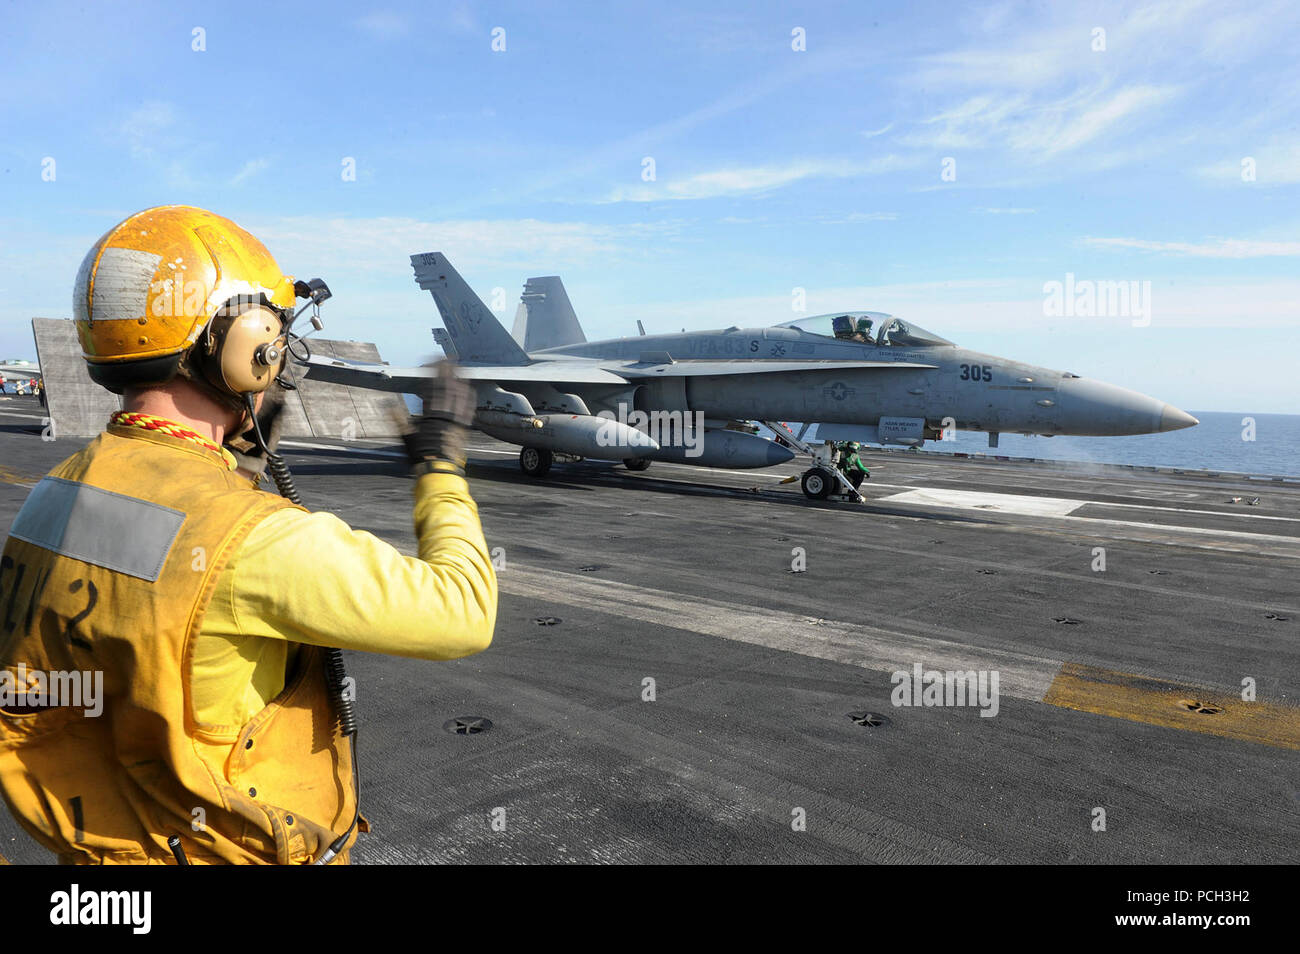 NORTH ARABIAN SEA (April 30, 2013) Aviation Boatswain’s Mate (Handling) 3rd Class Evan Yessick uses hand signals to guide an F/A-18C Hornet assigned to the Rampagers of Strike Fighter Squadron (VFA) 83 onto a catapult on the flight deck of the aircraft carrier USS Dwight D. Eisenhower (CVN 69). Dwight D. Eisenhower is deployed to the U.S. 5th Fleet area of responsibility promoting maritime security operations, theater security cooperation efforts and support missions as part of Operation Enduring Freedom. Stock Photo